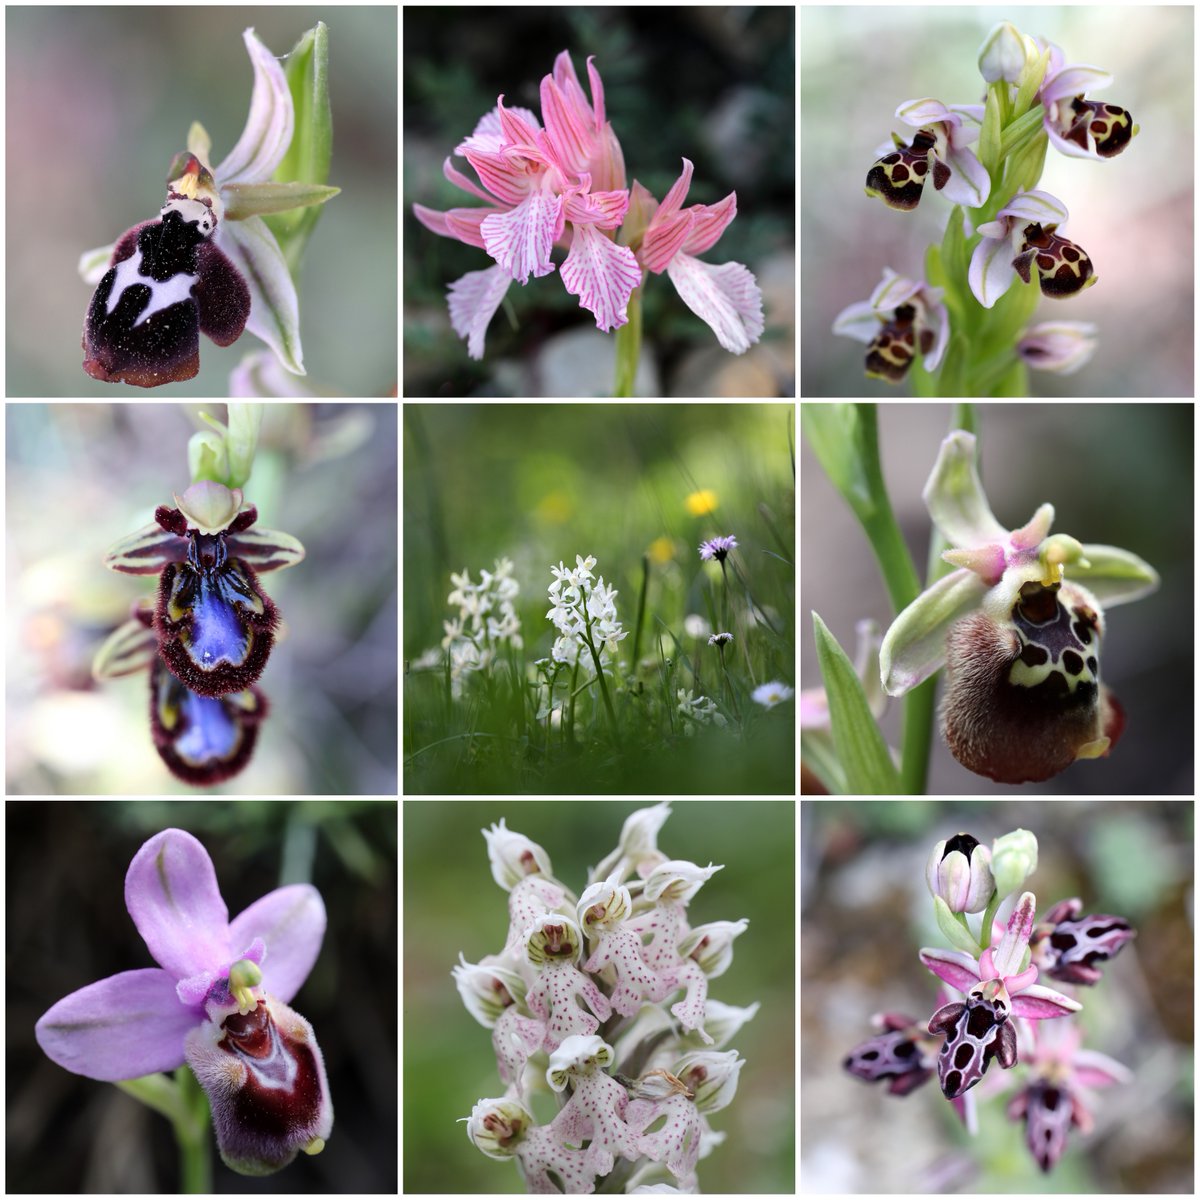 Just a handful of the over 50 species of #orchid we found with our guests on last week's wonderful #OrchidsOfRhodes tour. Next year's tour is already filling fast. If you'd like to travel with those who know Rhodes' orchids best, full details here: mariposanature.com/tours/botanica…